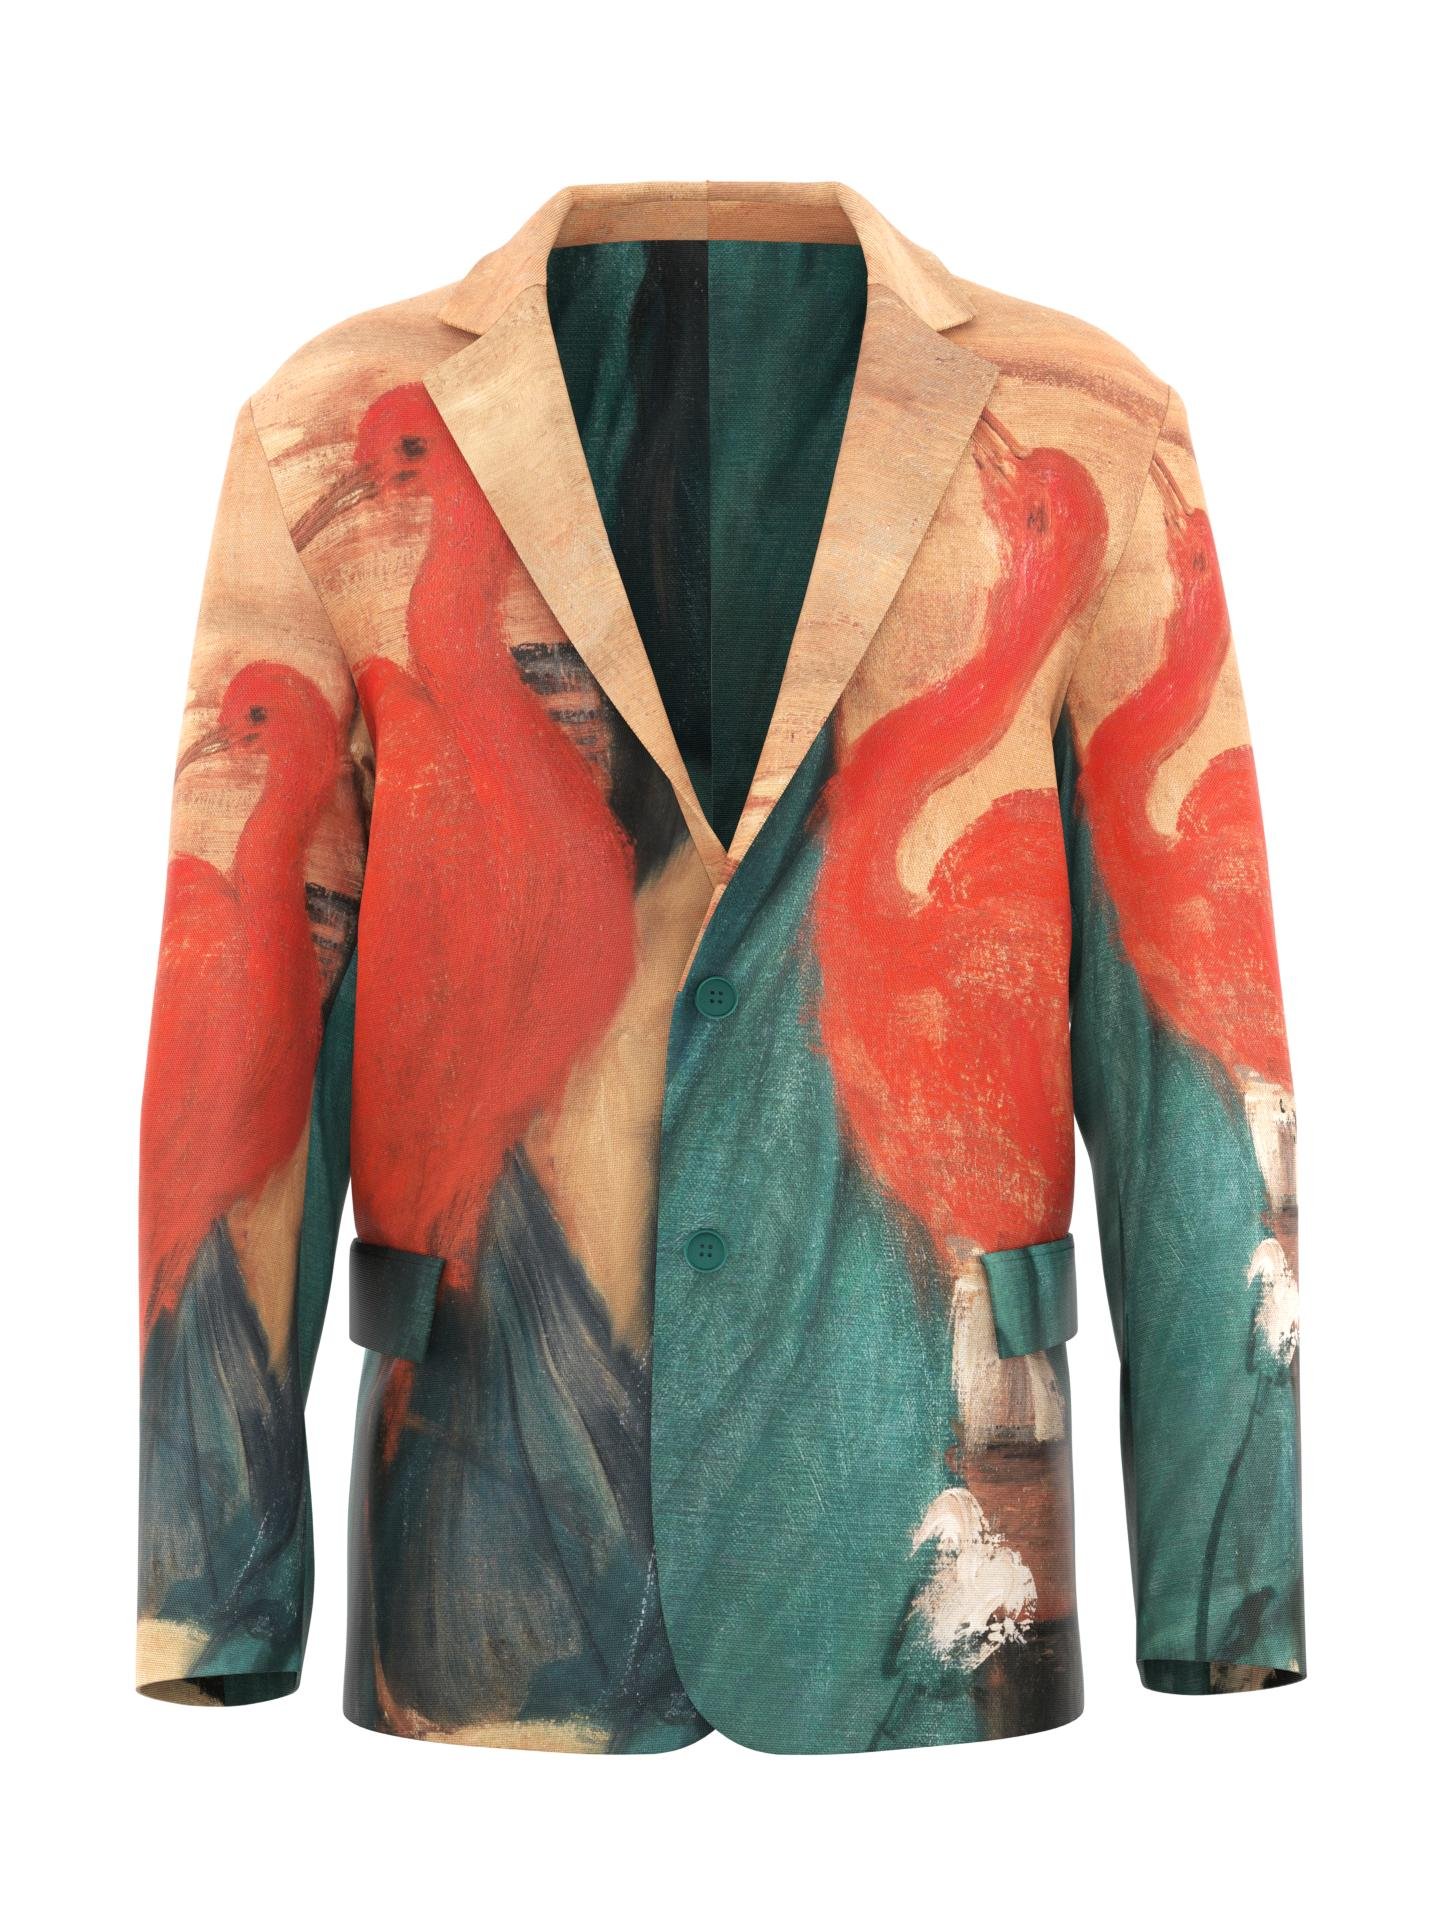 Blazer - Young Woman with Ibis by DRESSX